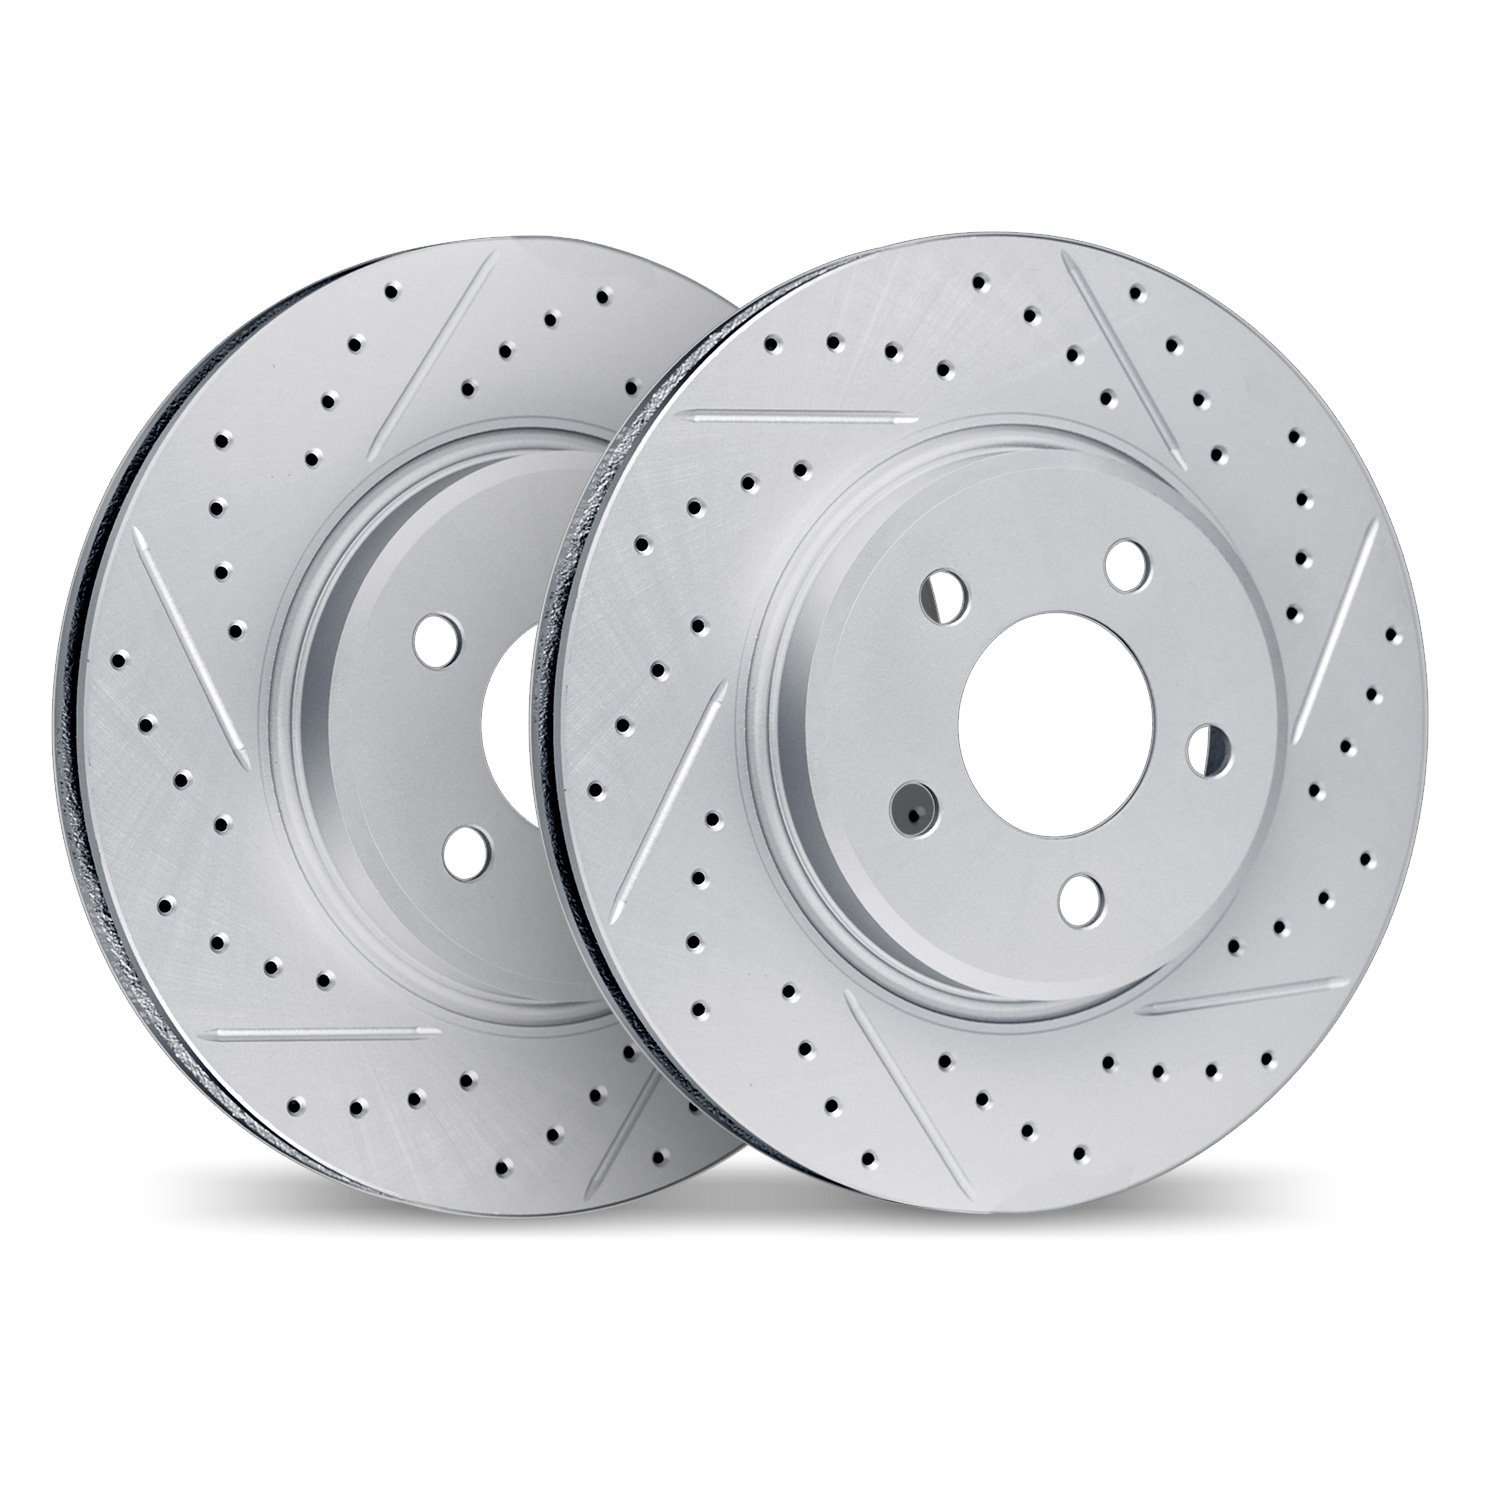 2002-58002 Geoperformance Drilled/Slotted Brake Rotors, 2017-2020 Acura/Honda, Position: Front